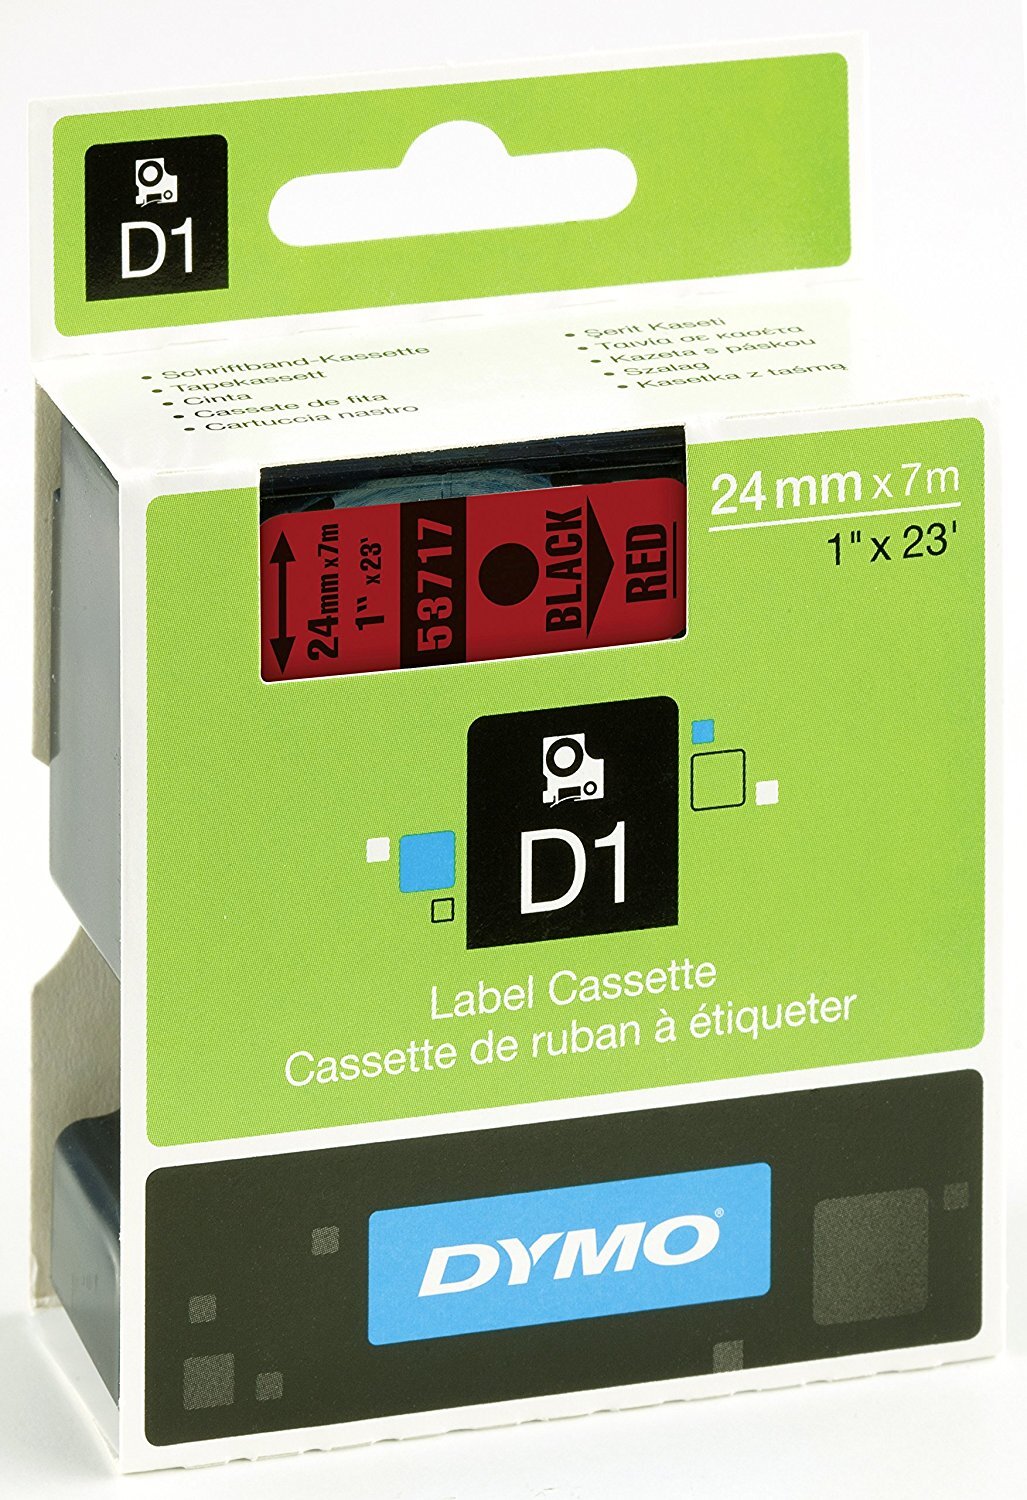 DYMO D1® -Standard Labels - Black on Red - 24mm x 7m